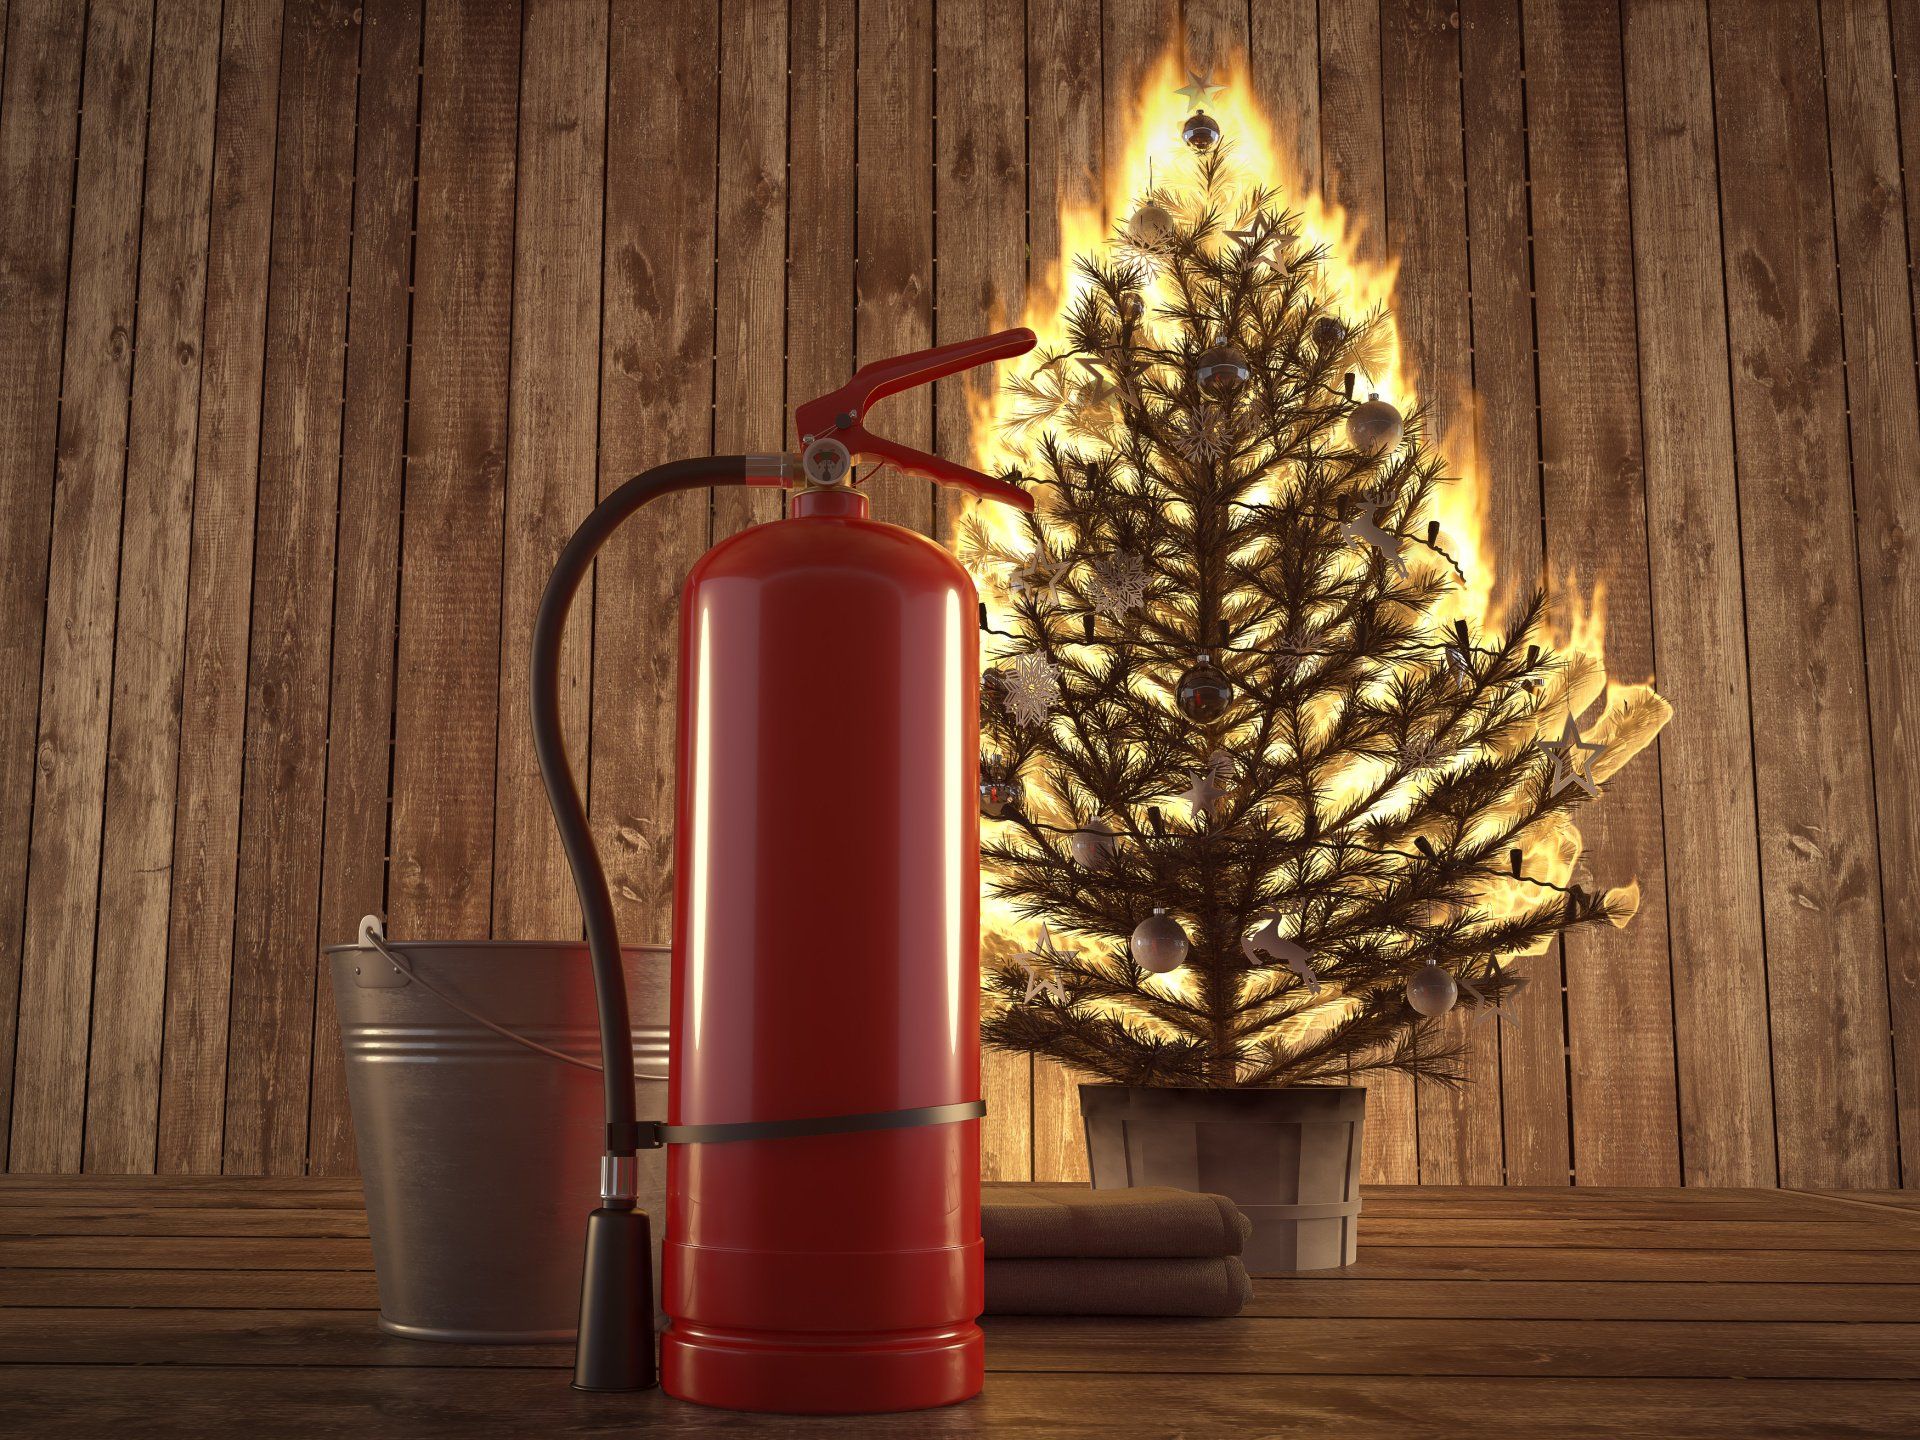 Christmas tree on fire with fire extinguisher and bucket sitting nearby.